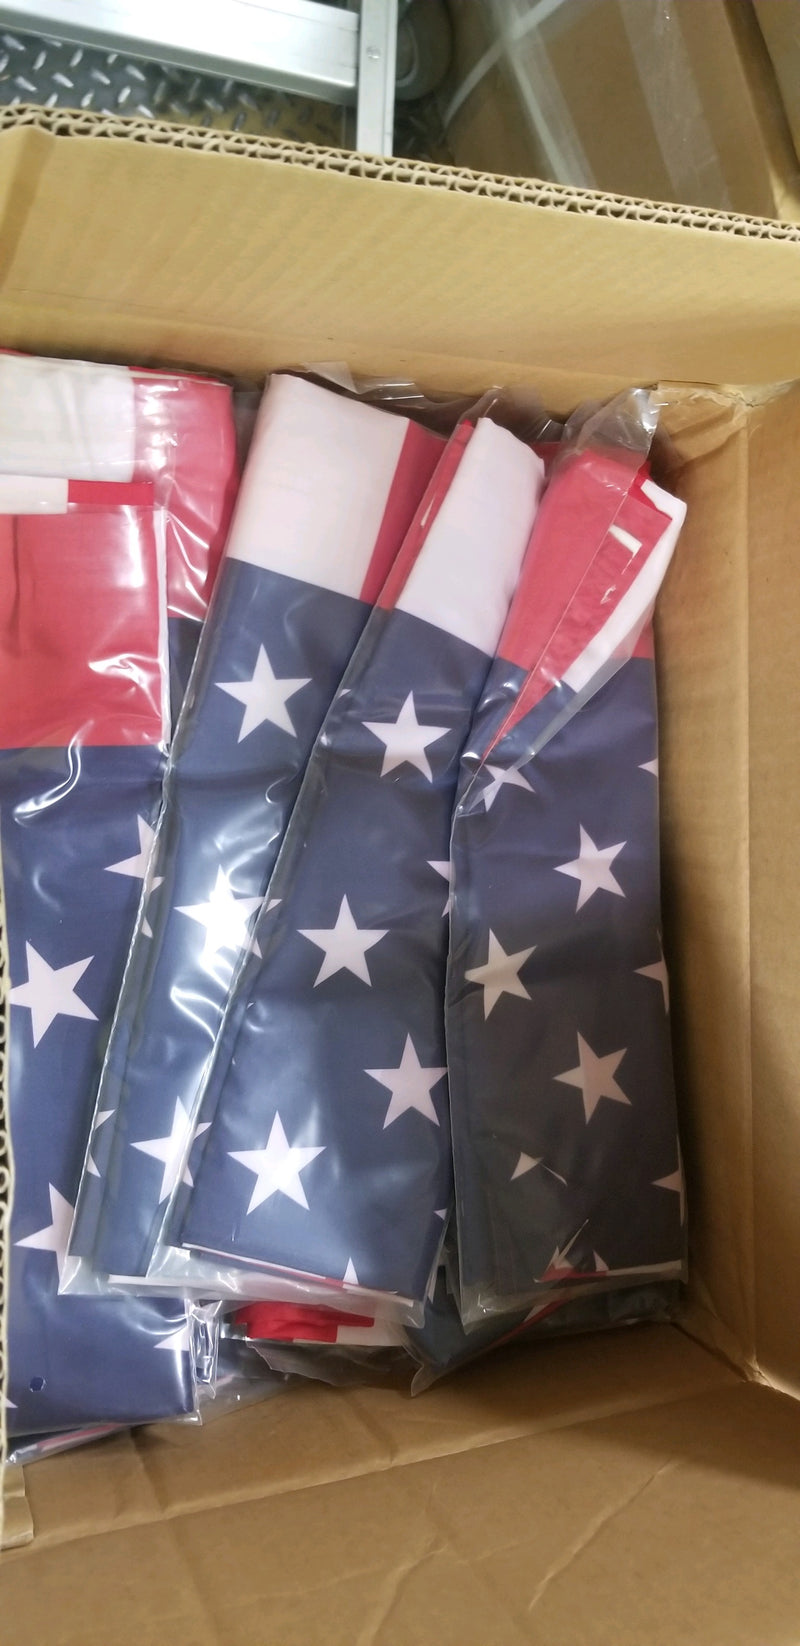 144 U.S.A. 100D PREMIUM PRINTED American USA Flags 3x5ft sold by the case! 3'x5'